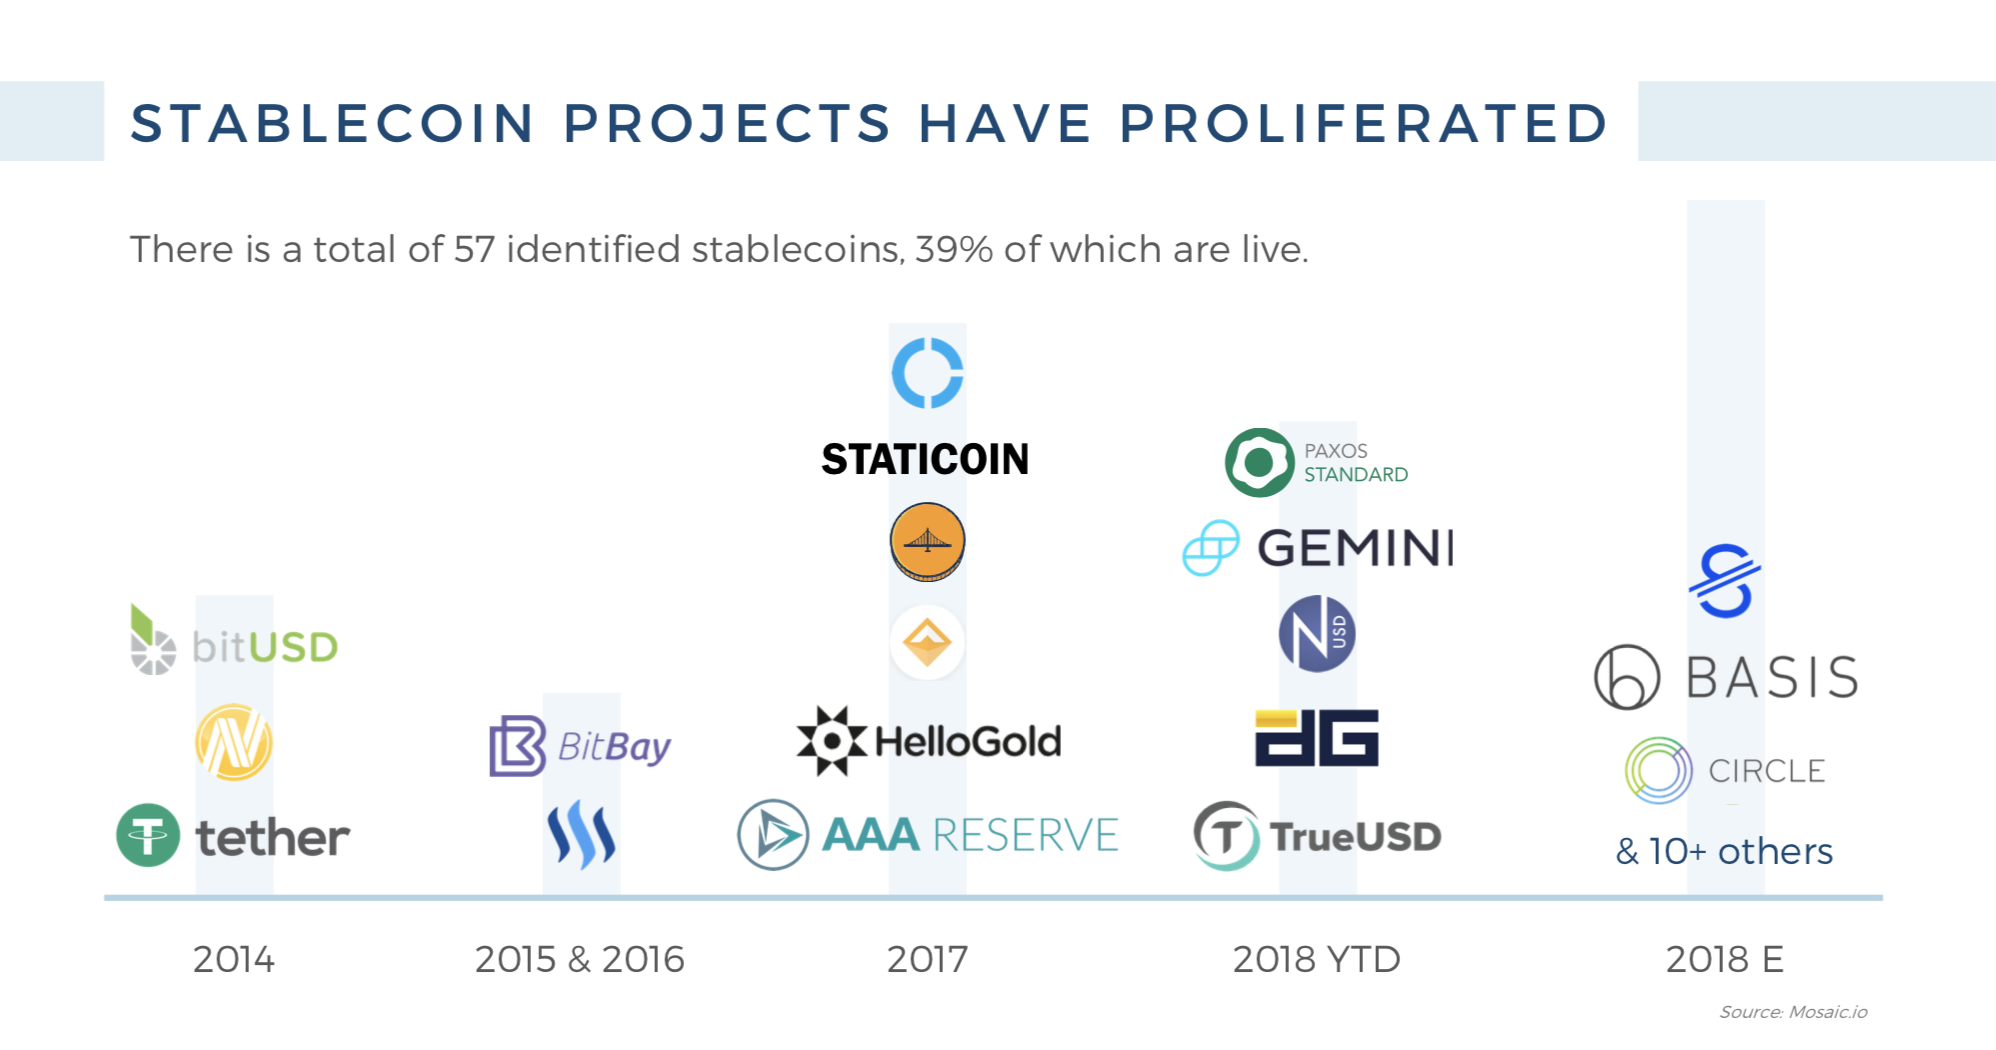 Guide: Stablecoin projects have proliferated